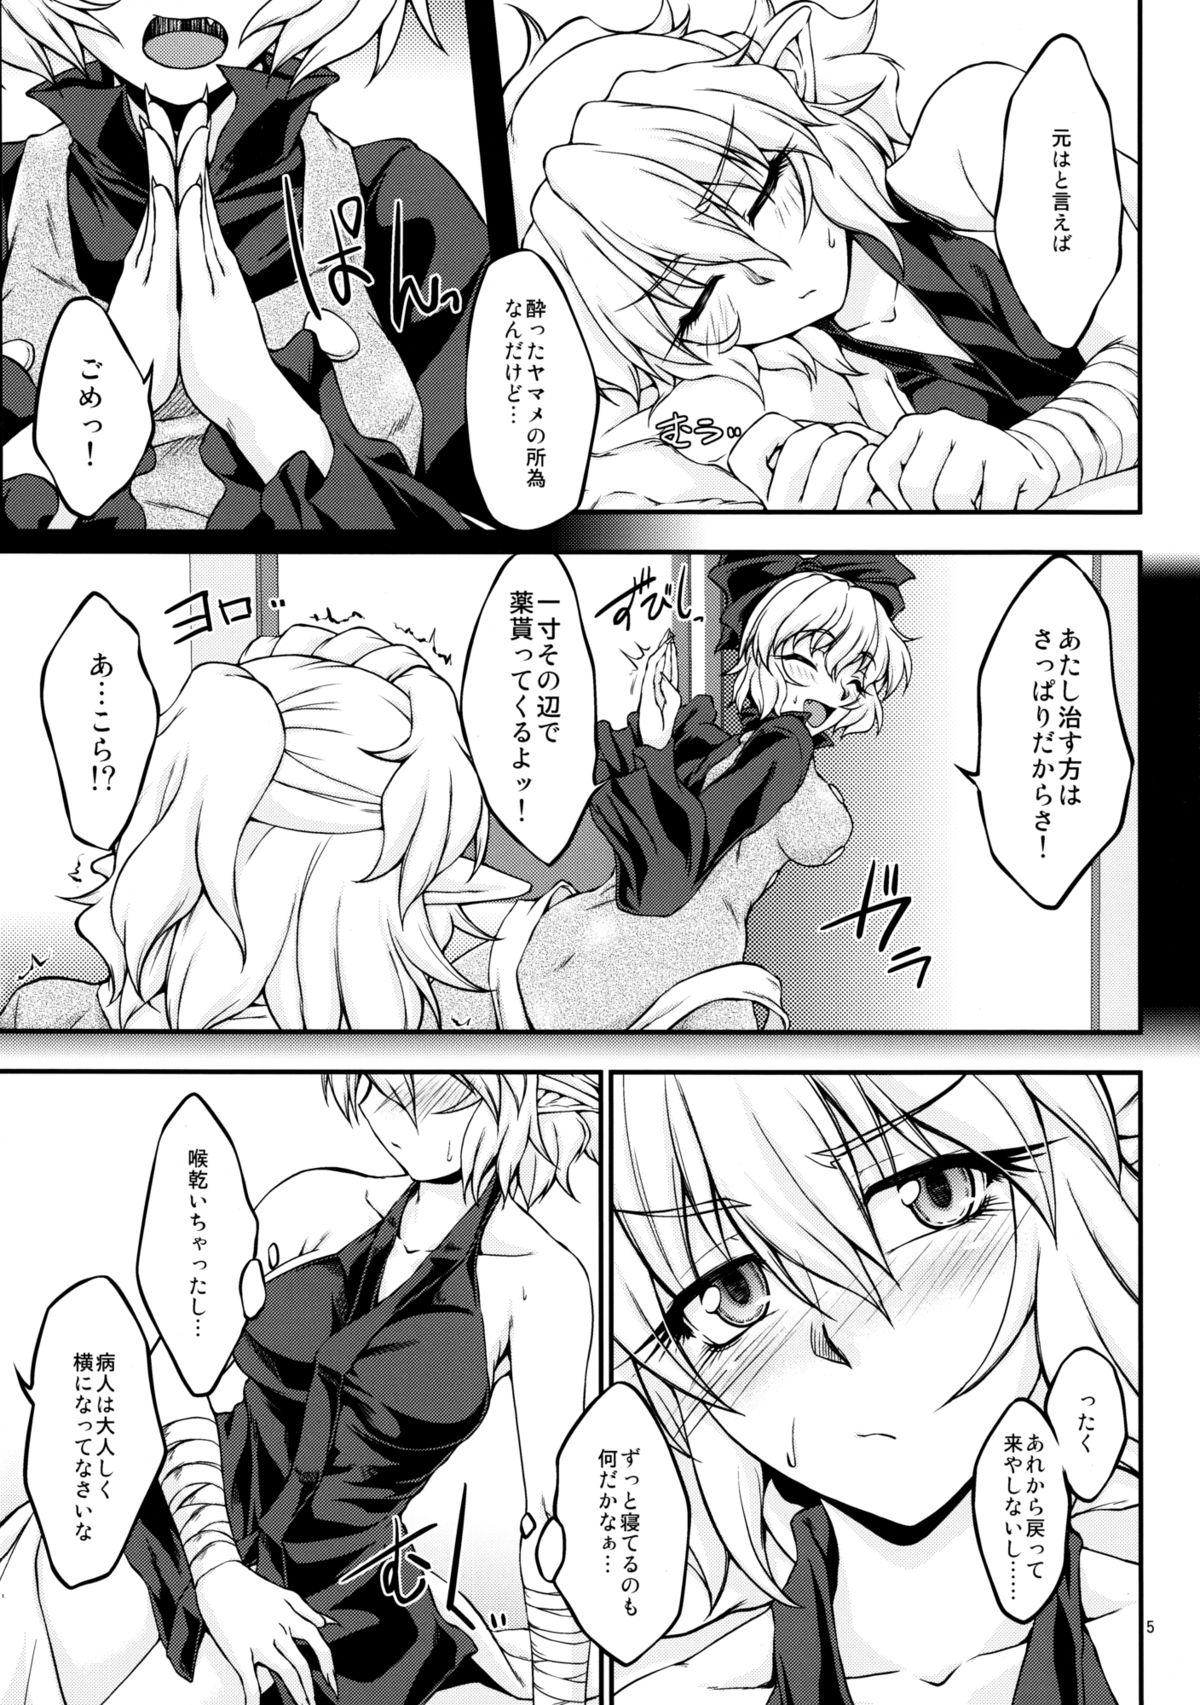 Sapphic Erotica Parsick! - Touhou project Spy - Page 4